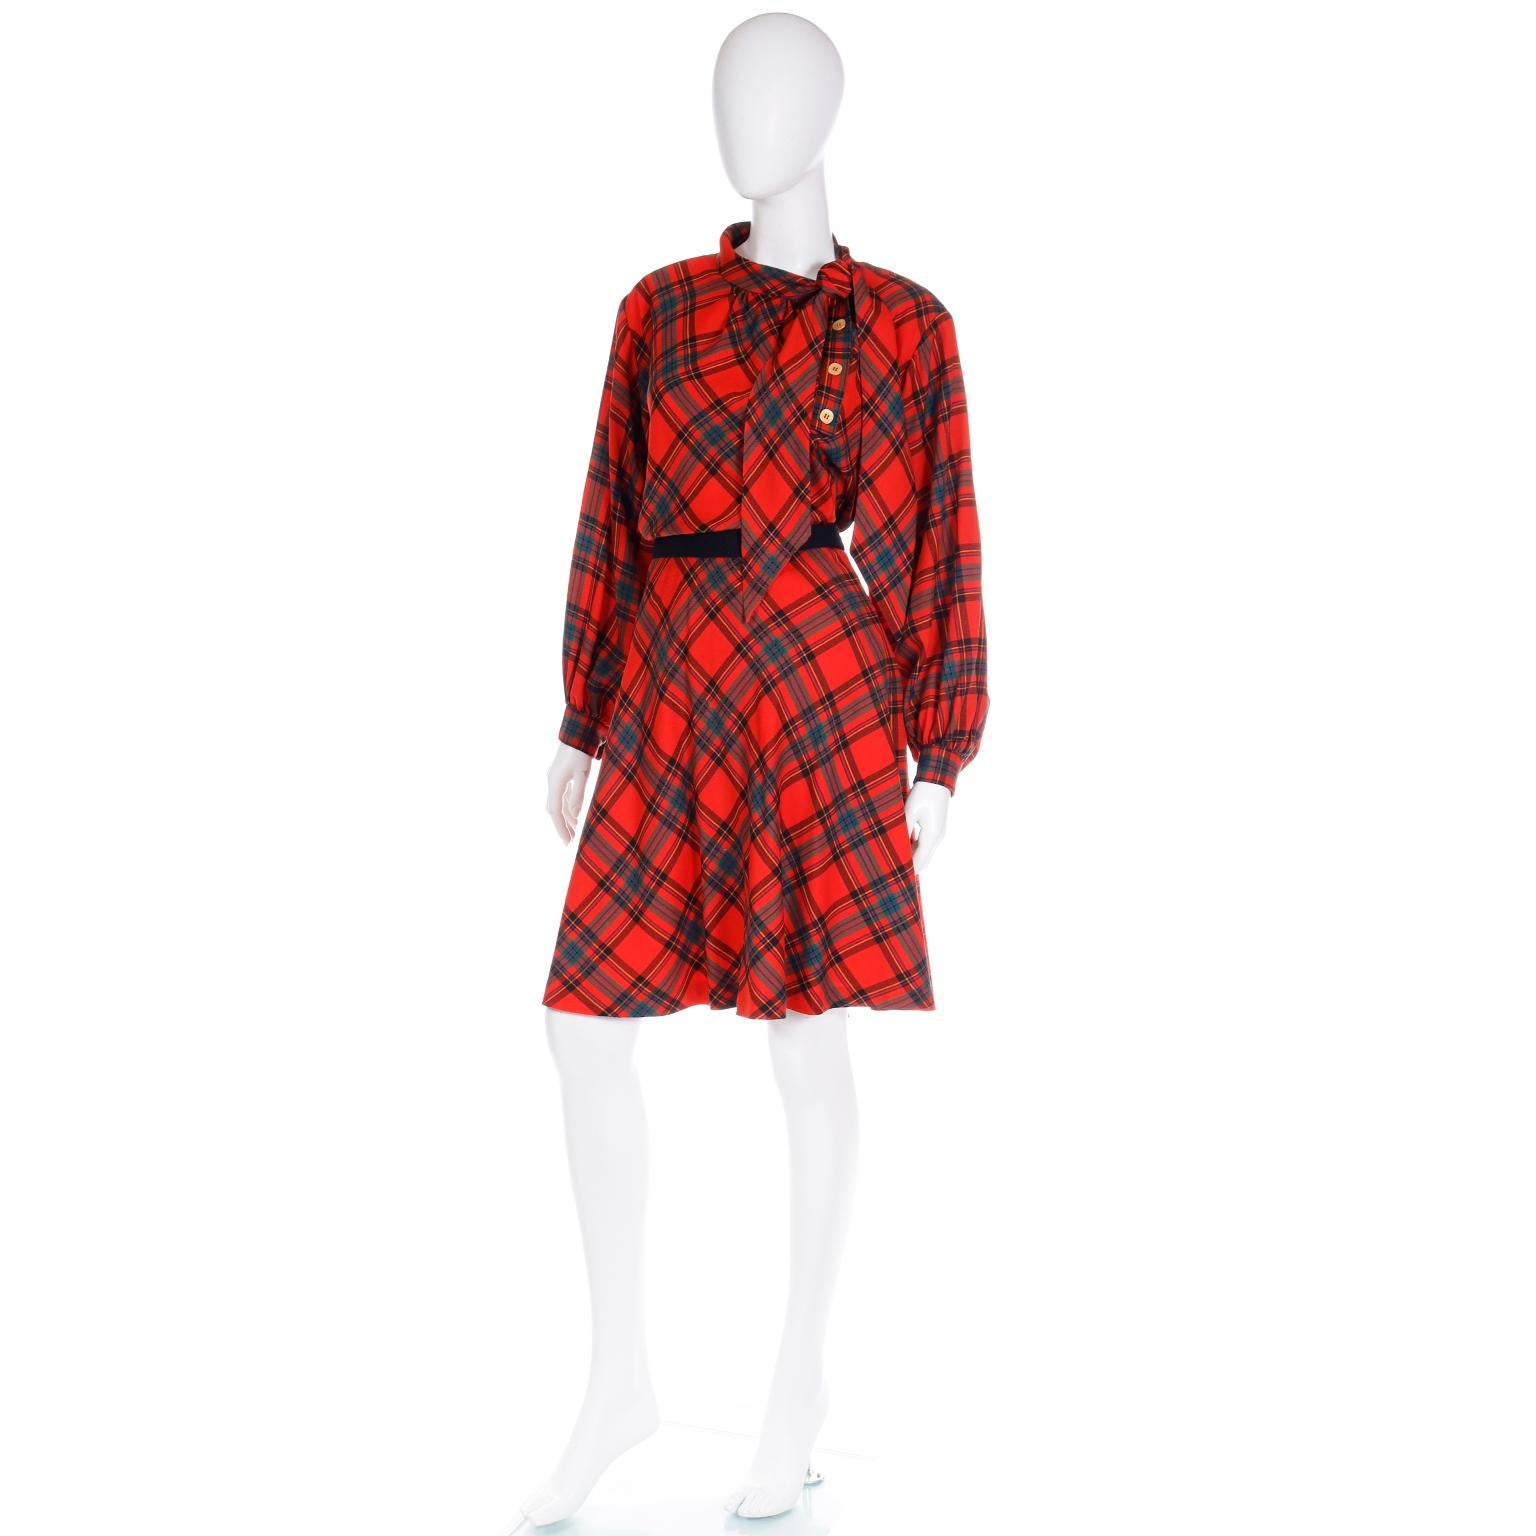 F/W 1987 Yves Saint Laurent Runway 2pc Dress Red Plaid Blouse & Skirt Outfit 1